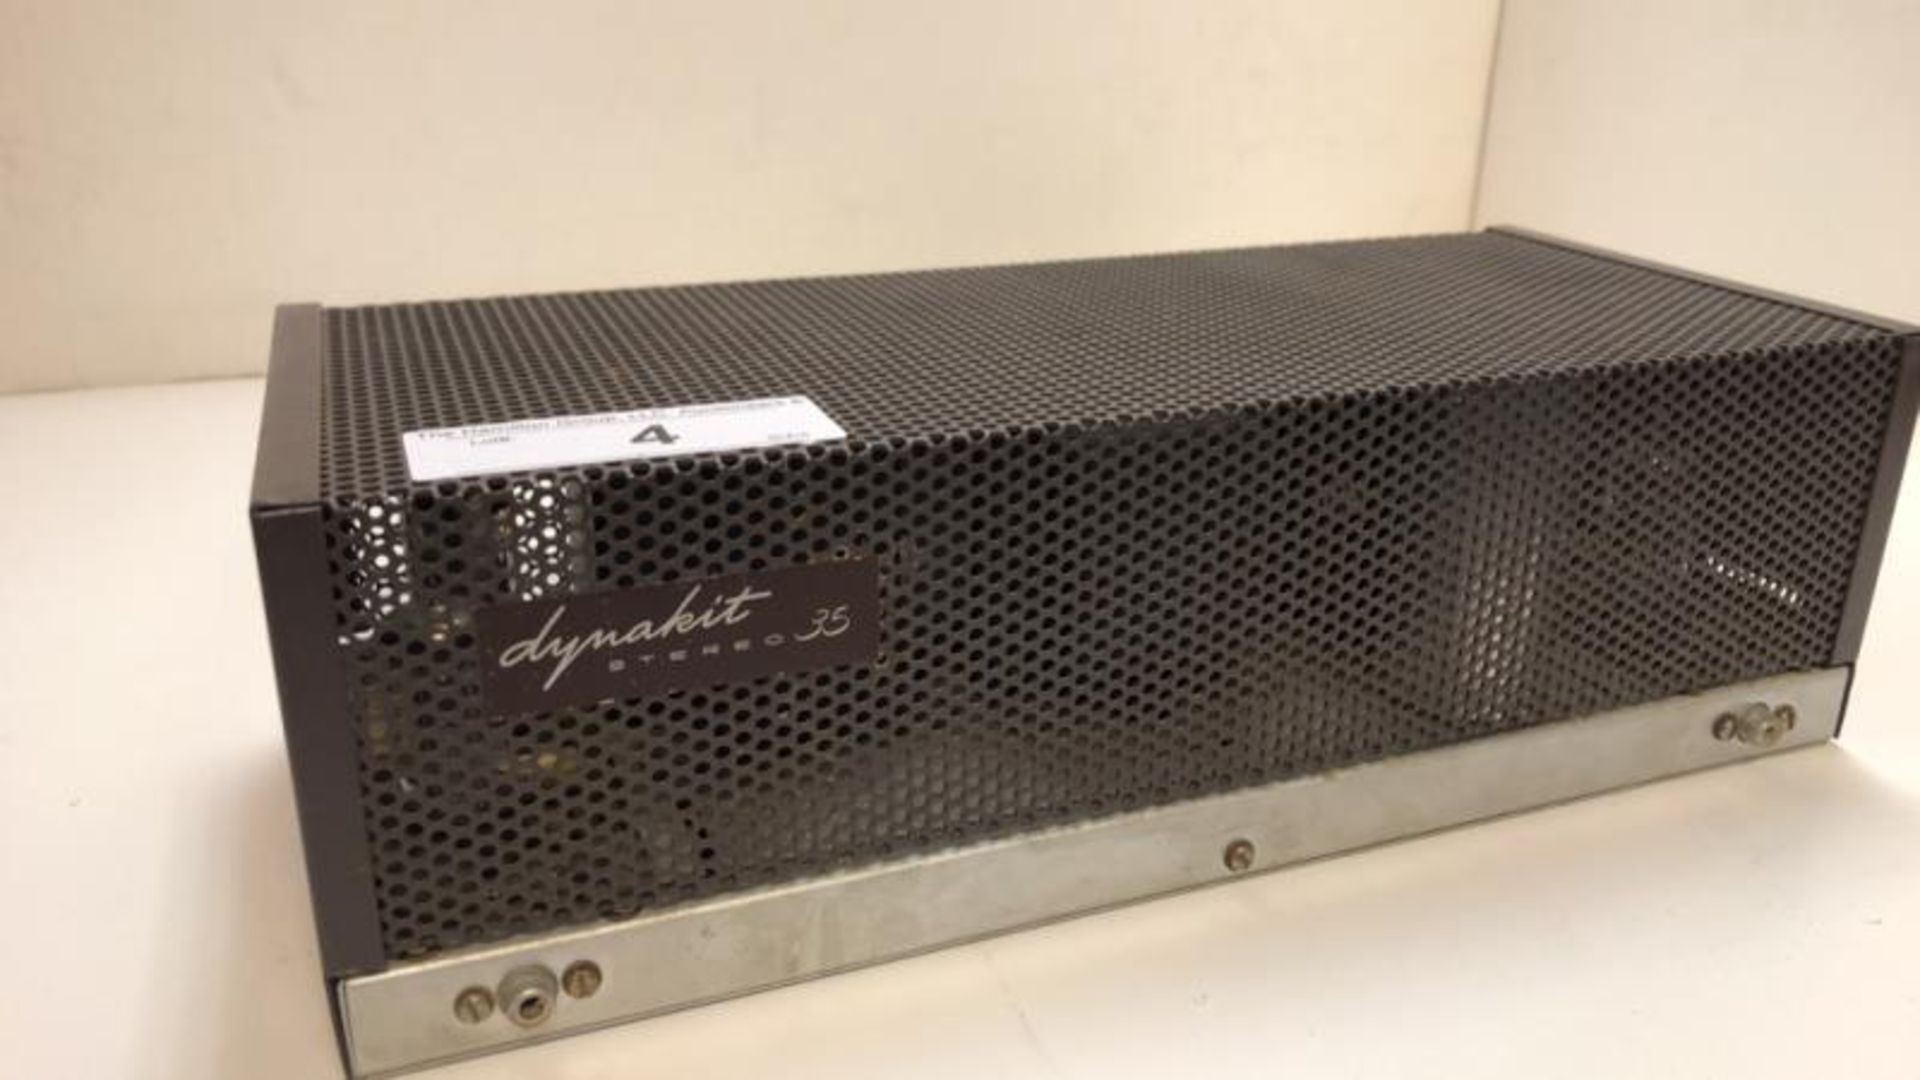 Dynaco dynakit stereo 35 tube amp, with cage - Image 3 of 5